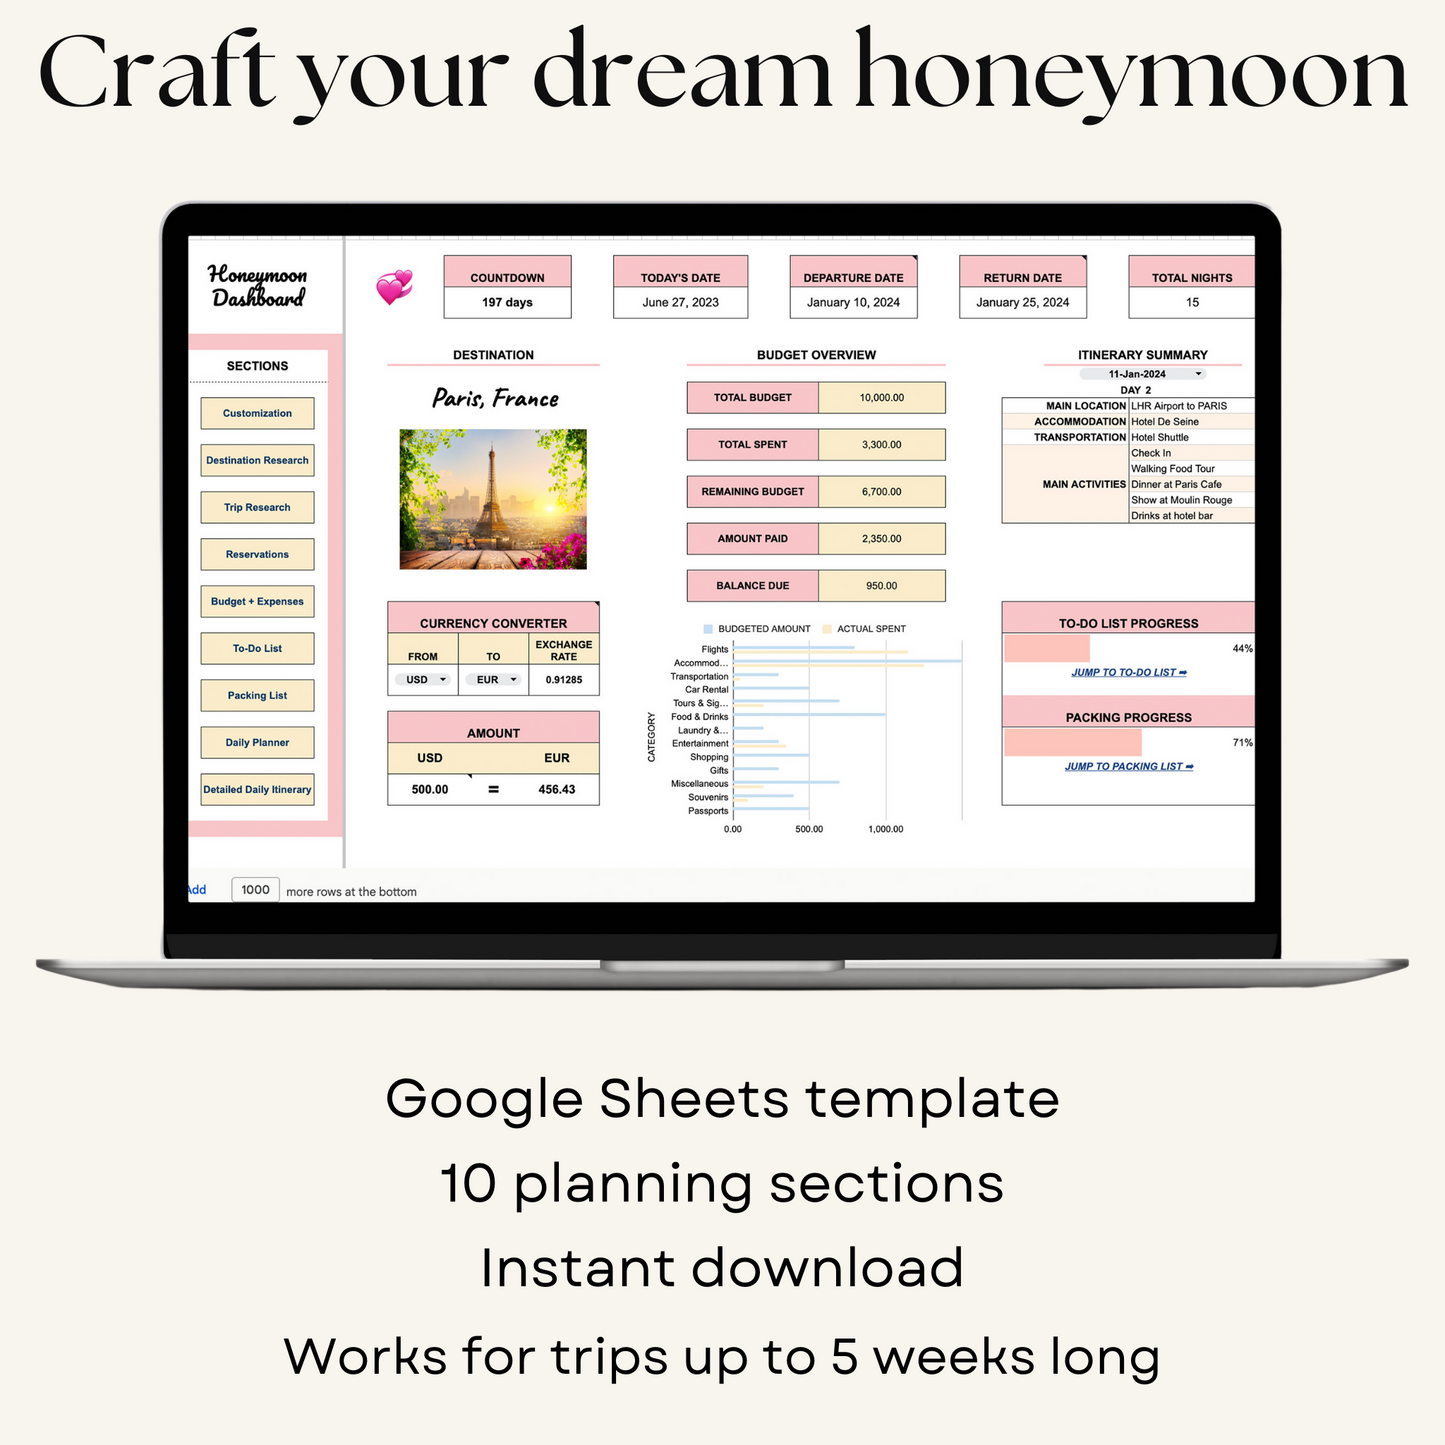 Plan your dream honeymoon with the help of our meticulously crafted Honeymoon Planner. Personalize your itinerary, manage your budget and expenses, and collaborate seamlessly with the intuitive and user-friendly Google Sheets interface. Download your honeymoon planner today and say "YES" to stress-free planning!